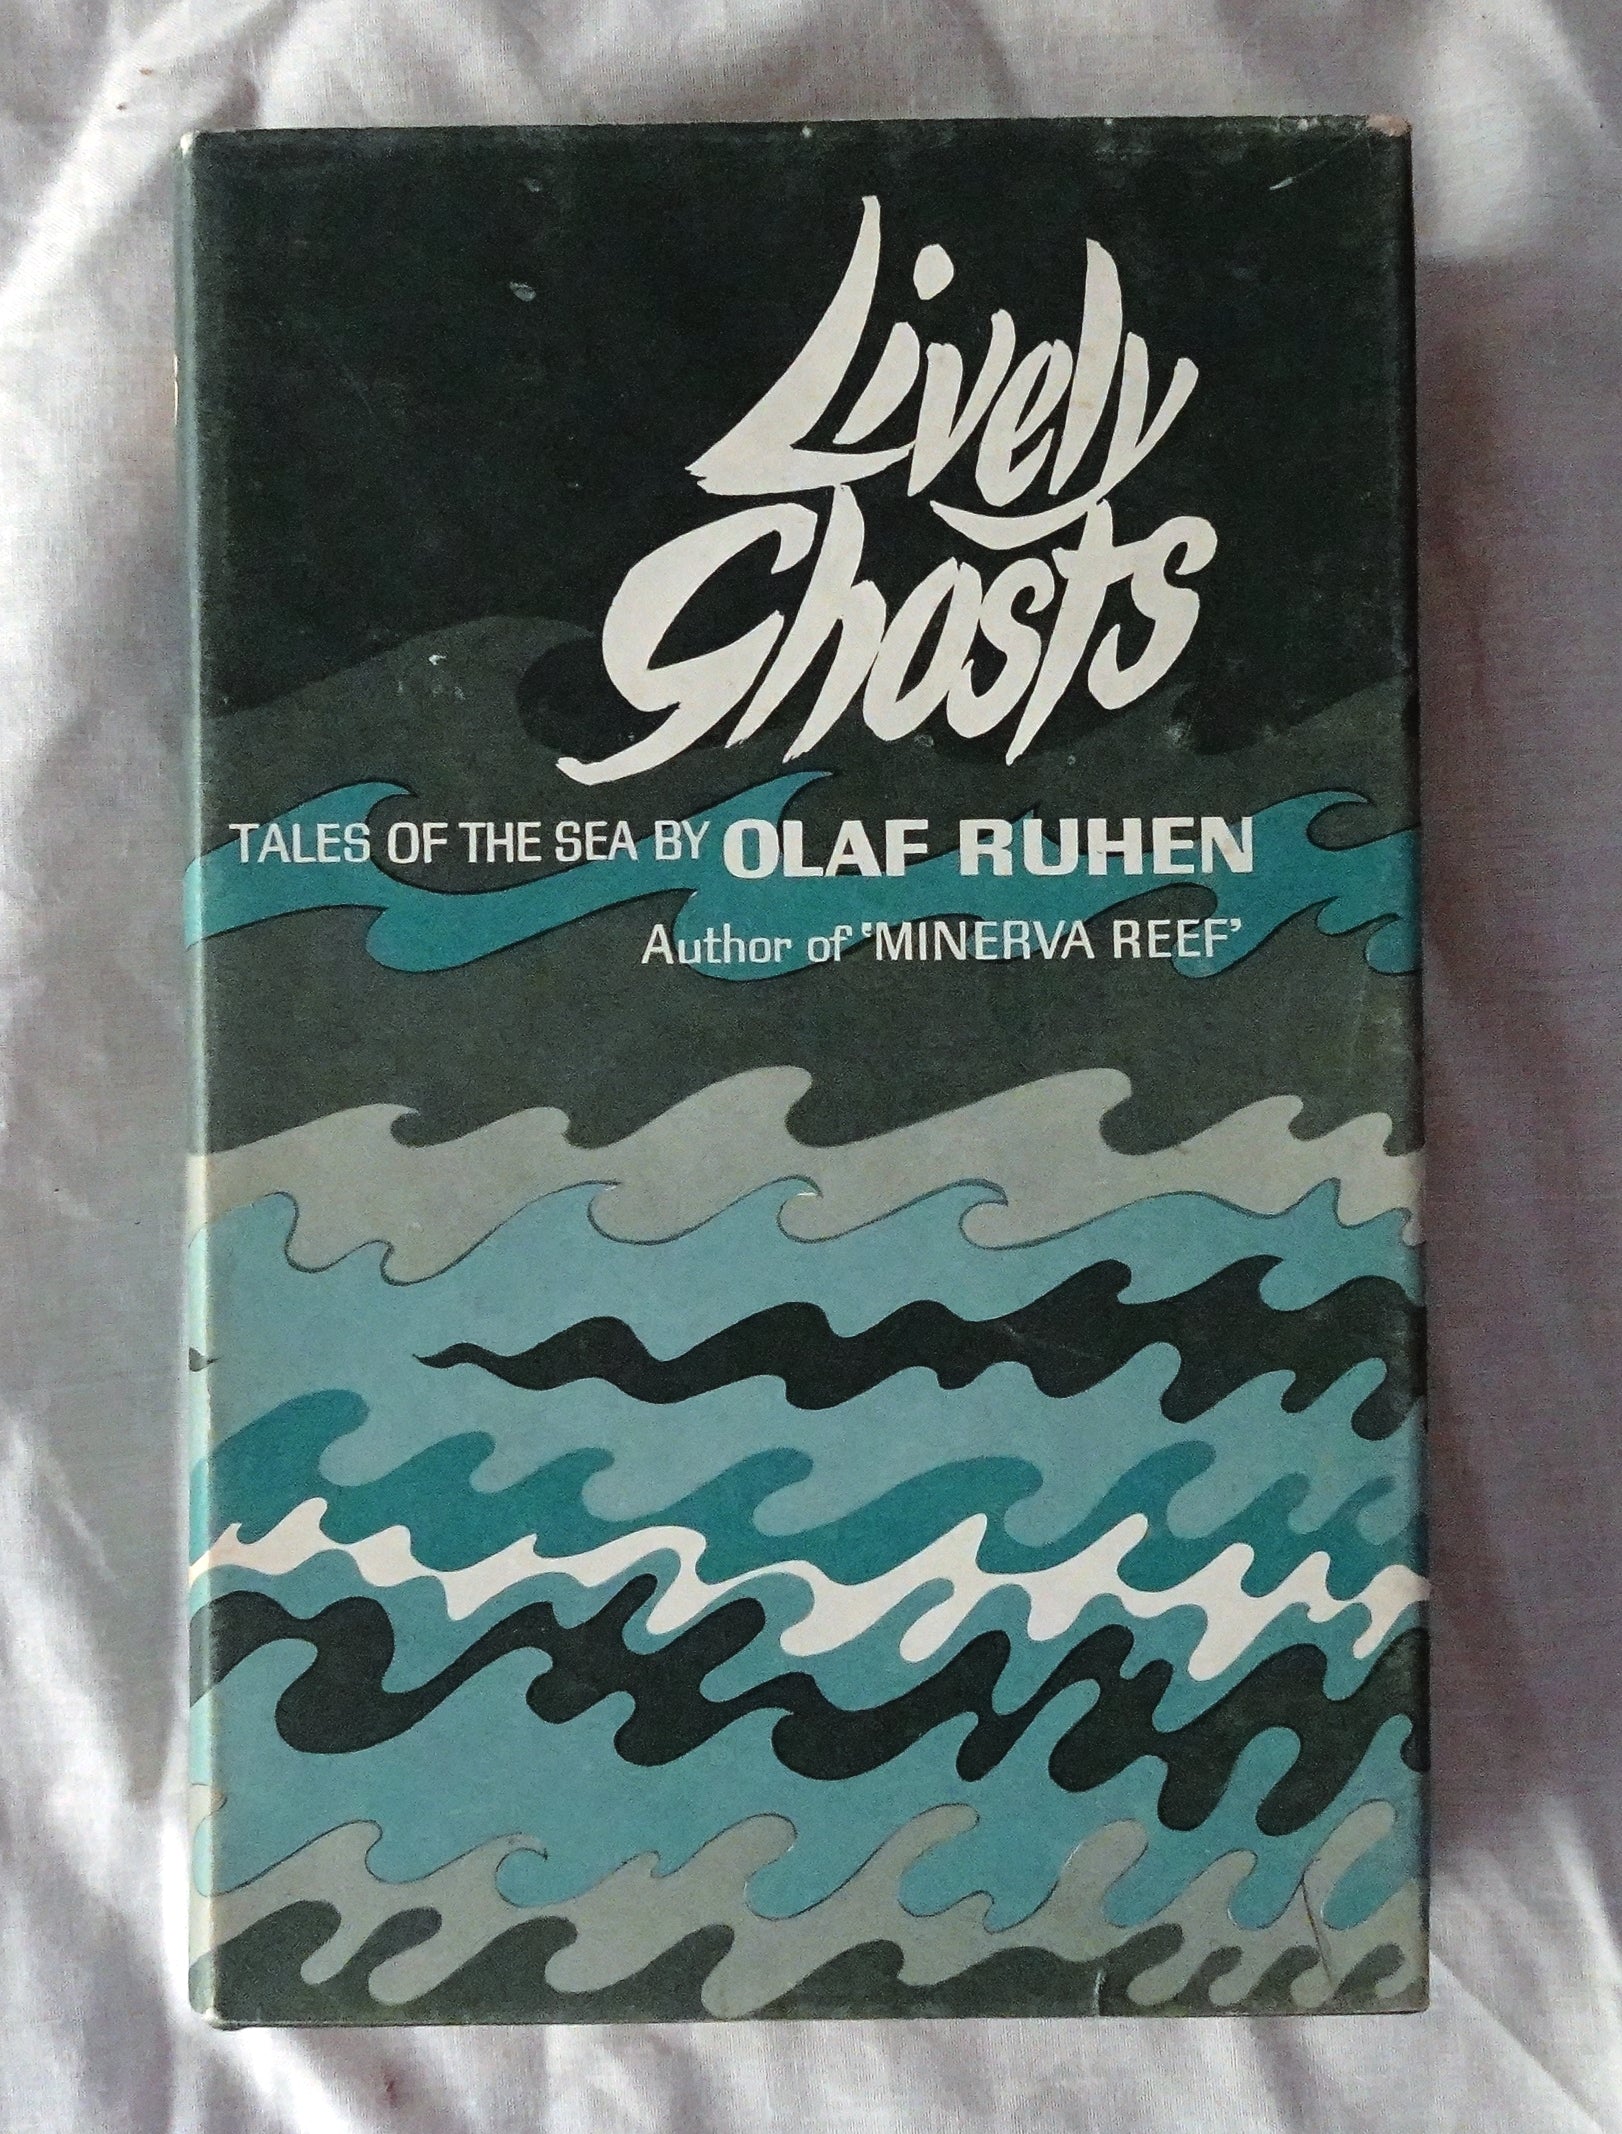 Lively Ghosts  Tales of the Sea and New Zealand  by Olaf Ruhen  Line drawings by Sally and Peter Keep